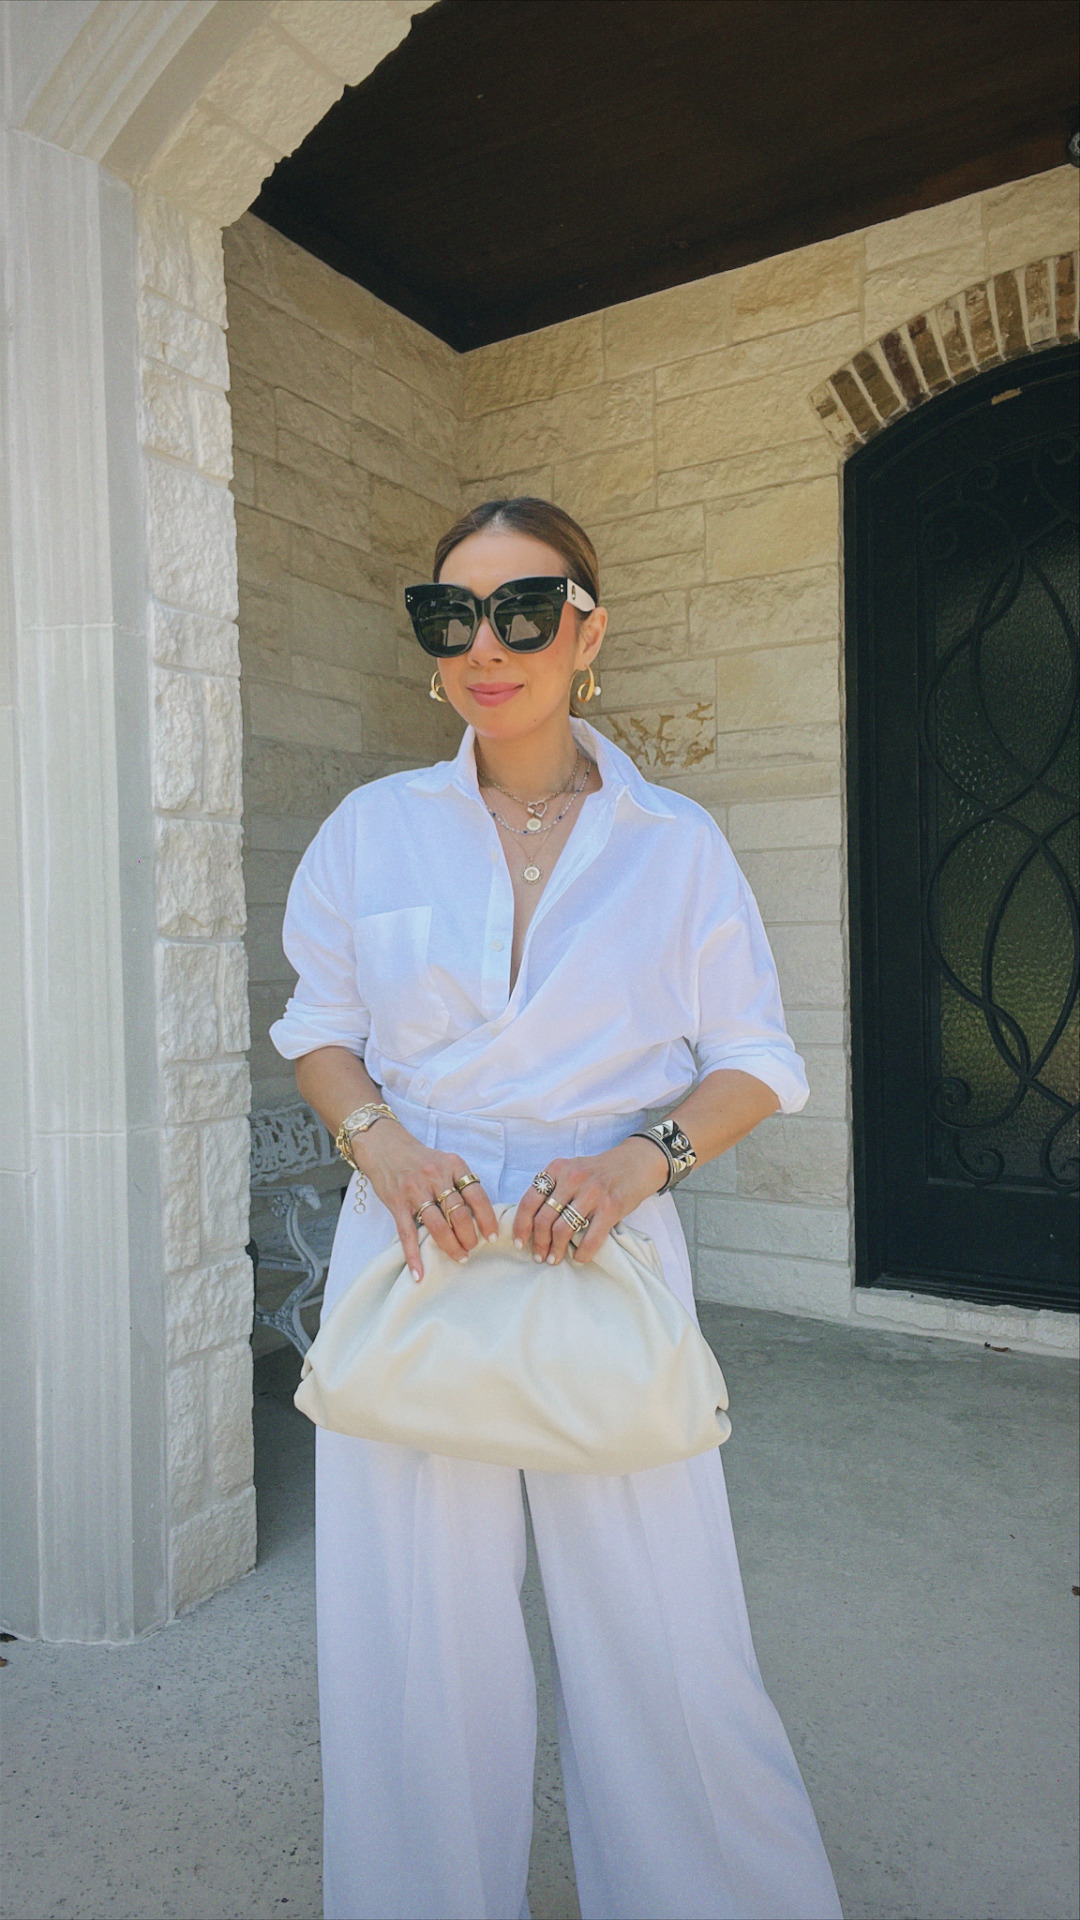 What To Wear With A White Button-Down Shirt - 16 Fresh Outfit Ideas